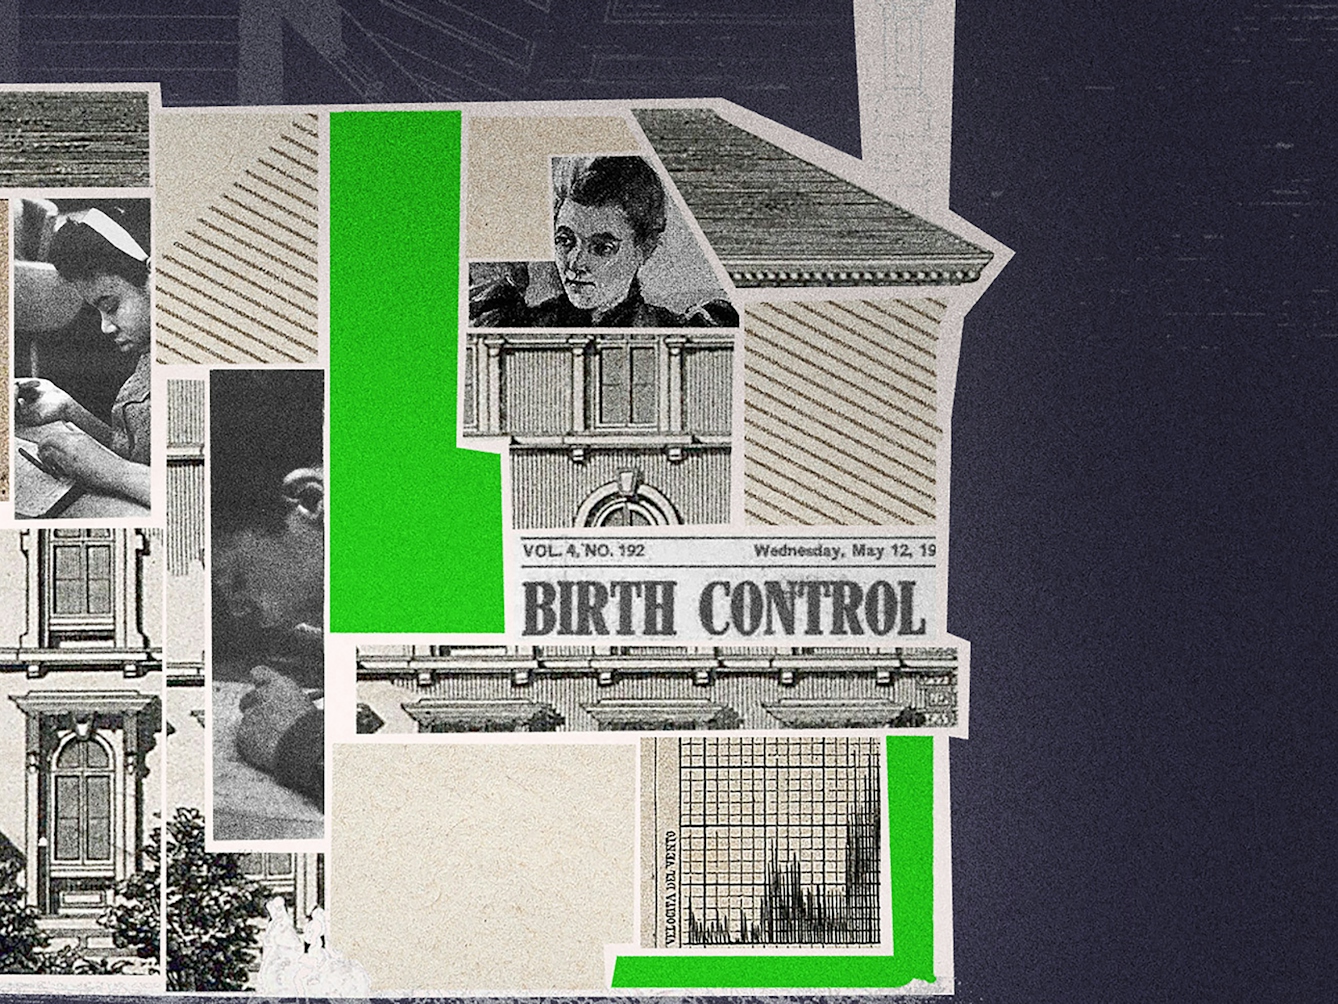 Crop from a larger digital collage. Shown is a building, labelled 'City of London Orphan School, Brixton'. The building's interior is filled with different collage elements, including newspaper headlines reading 'Eugenics', 'Second Boer War' and 'Birth Control'. There are also black and white photos of Francis Galton, John Locke and Sidney Webb. The remainder of the building is filled with green and sepia shapes. 